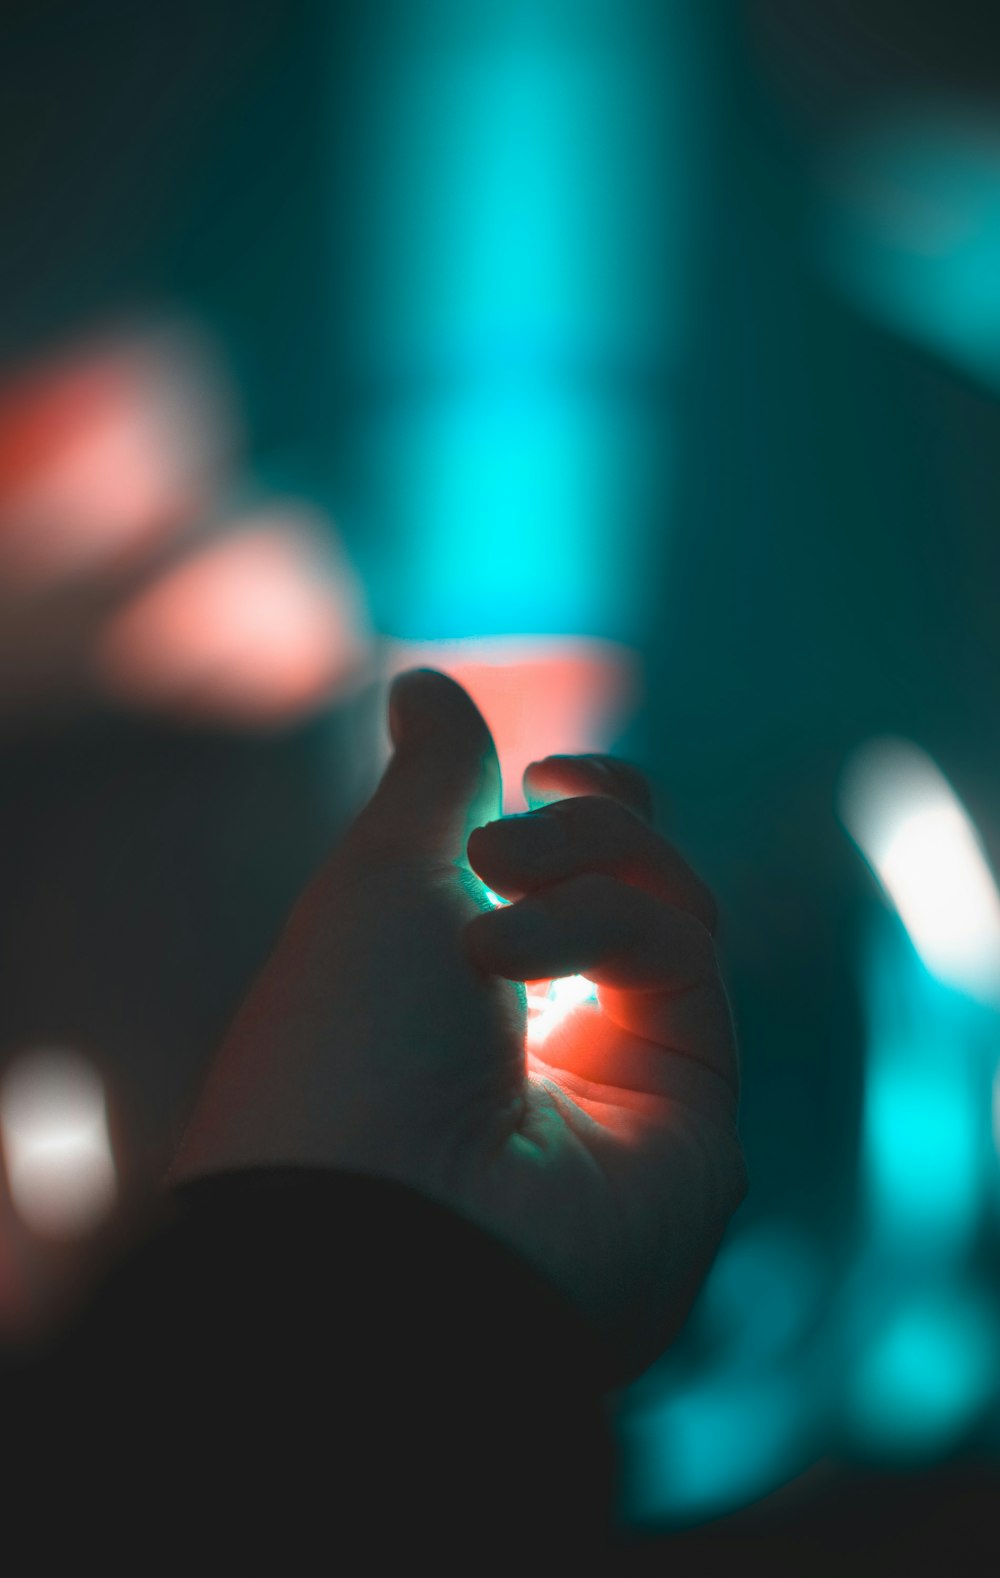 persons left hand with blue light